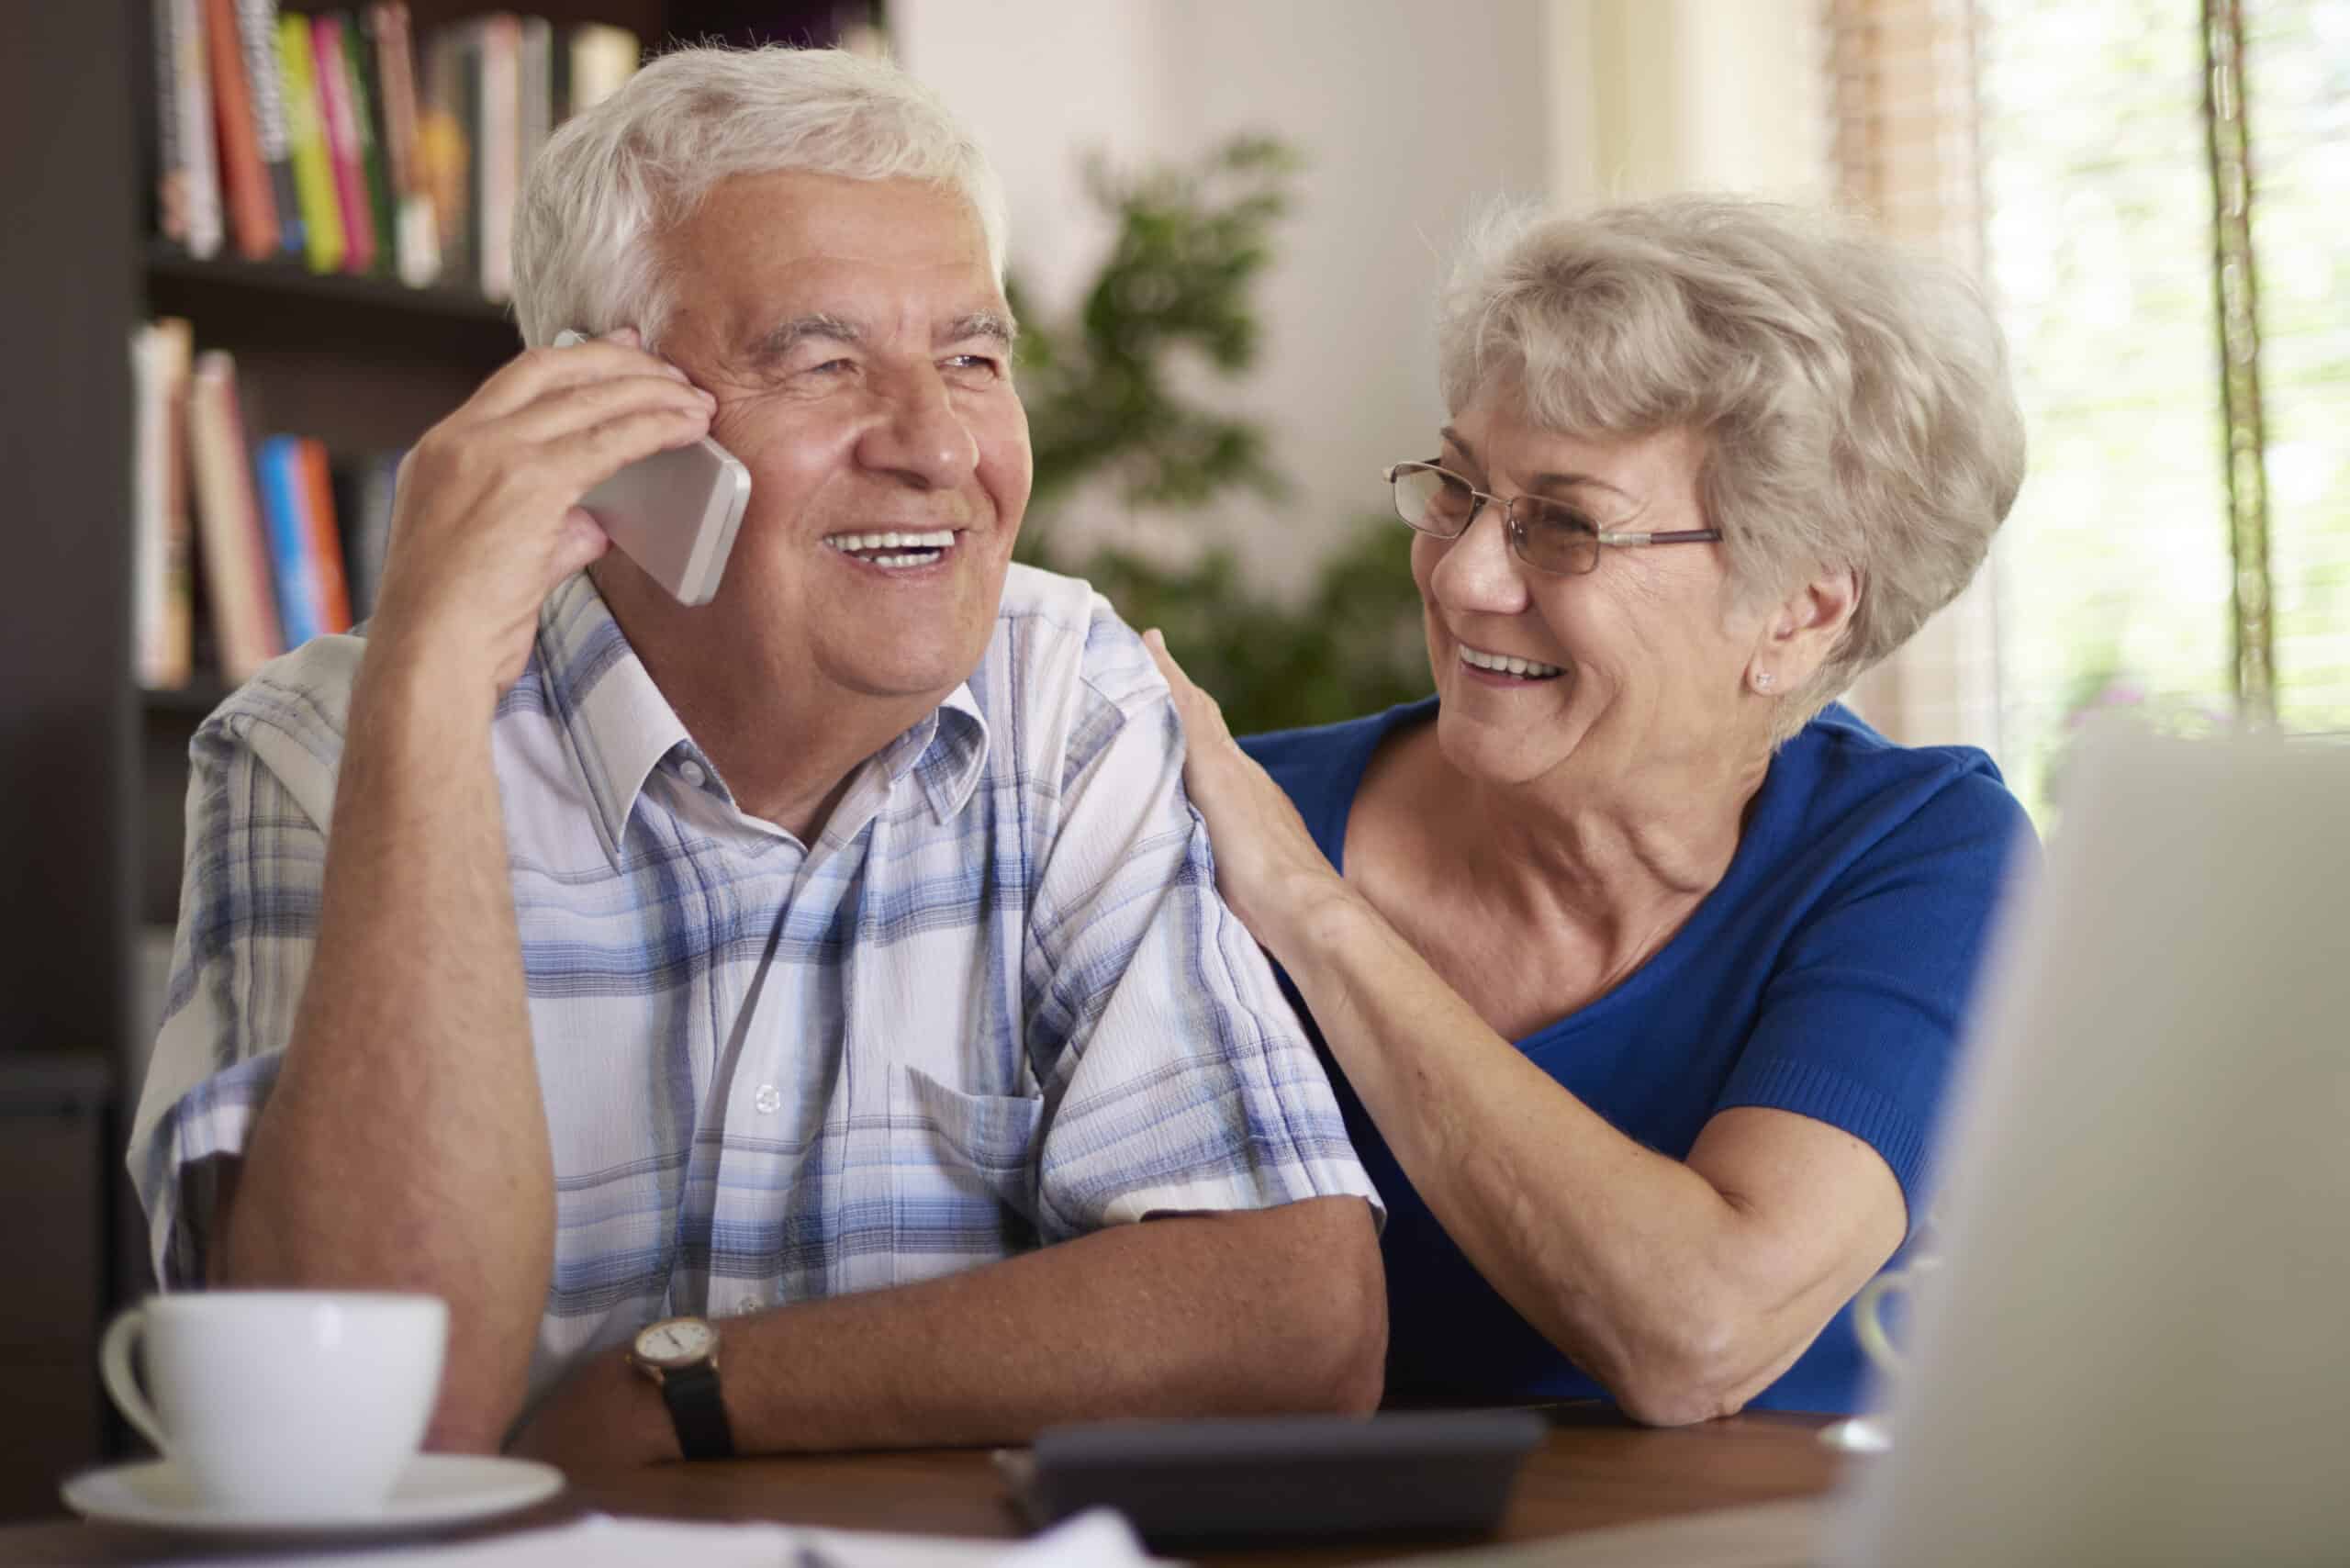 An older adult using the telephone with support from a loved one